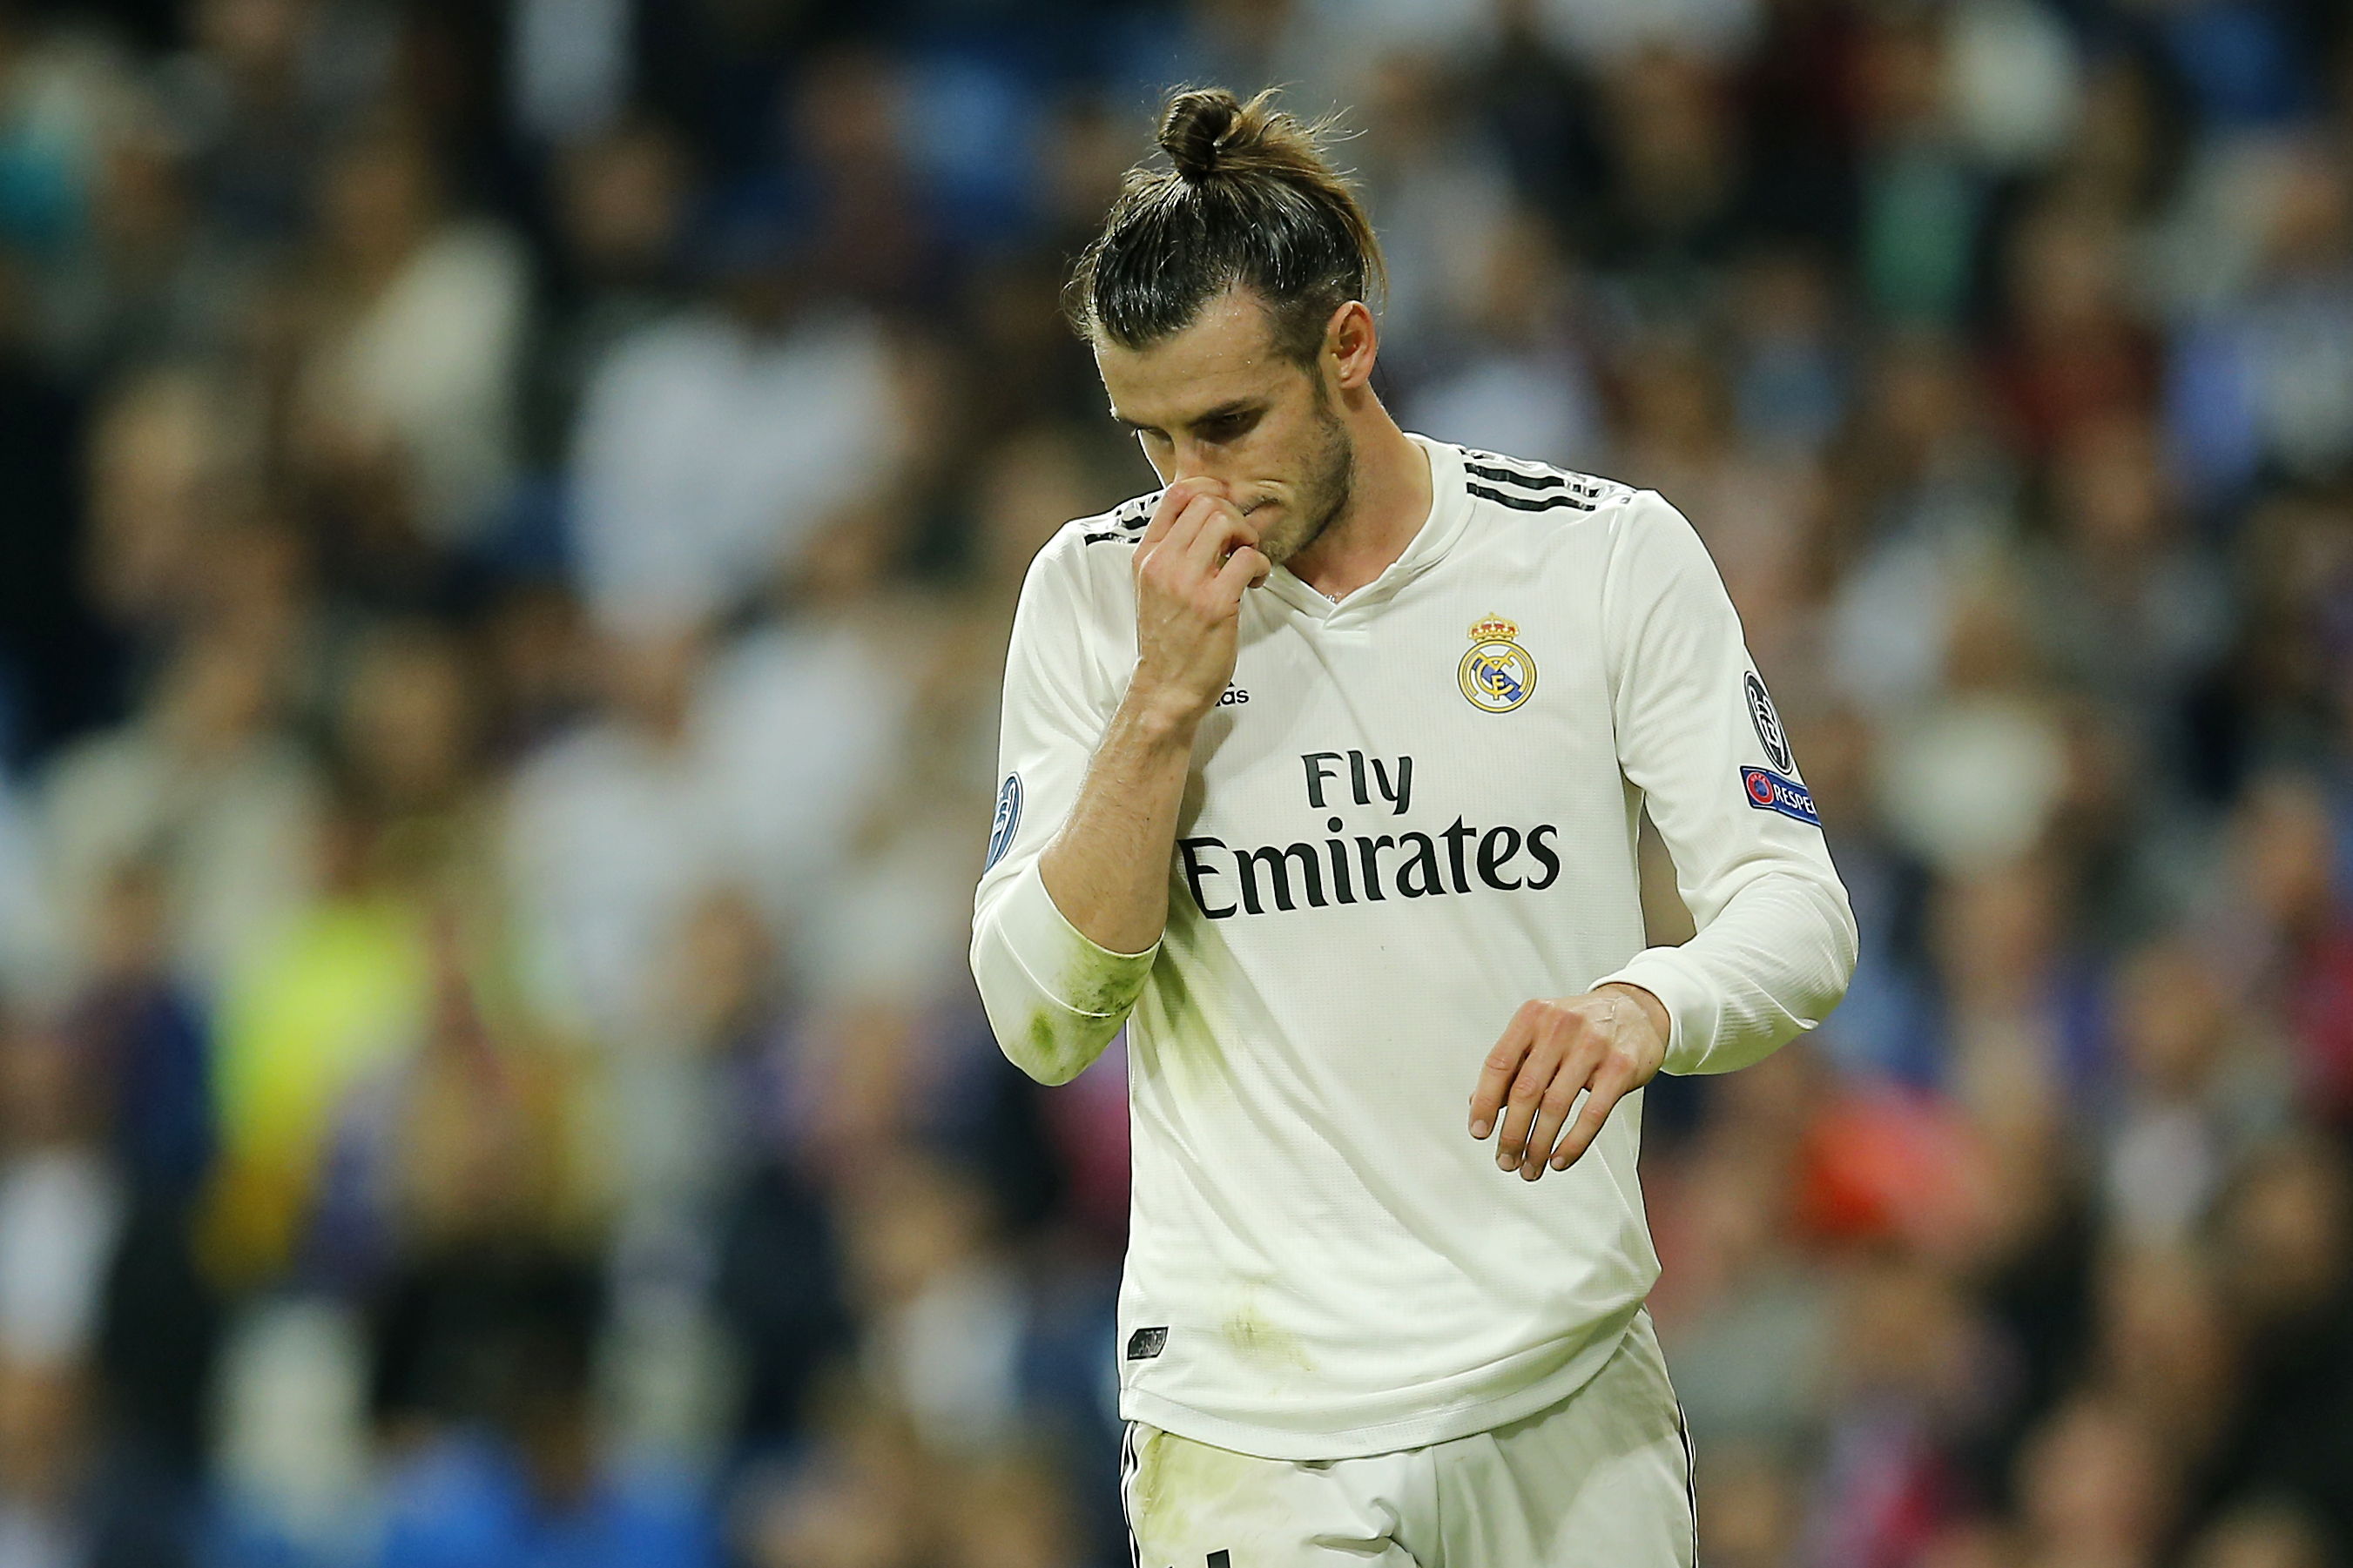 Official: Bale won't be punished for 'Iberian slap' goal